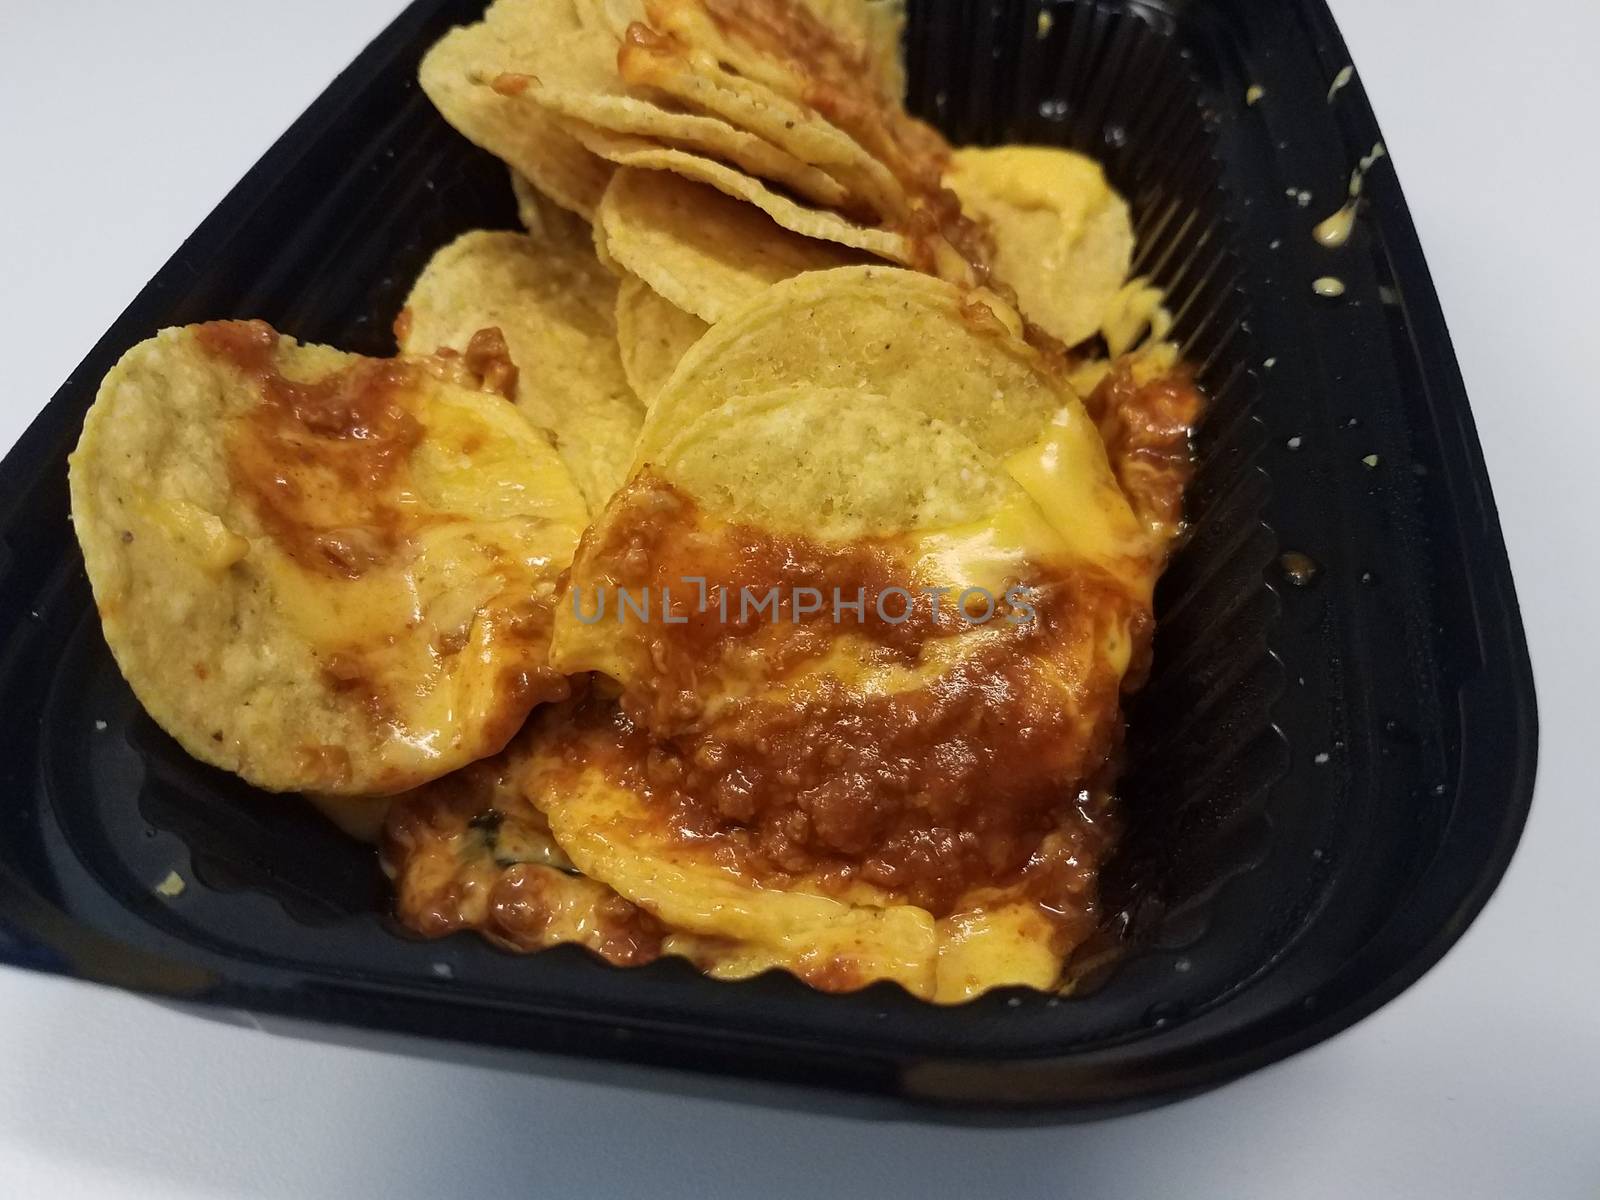 tortilla chips with cheese and meat sauce in black plastic container by stockphotofan1